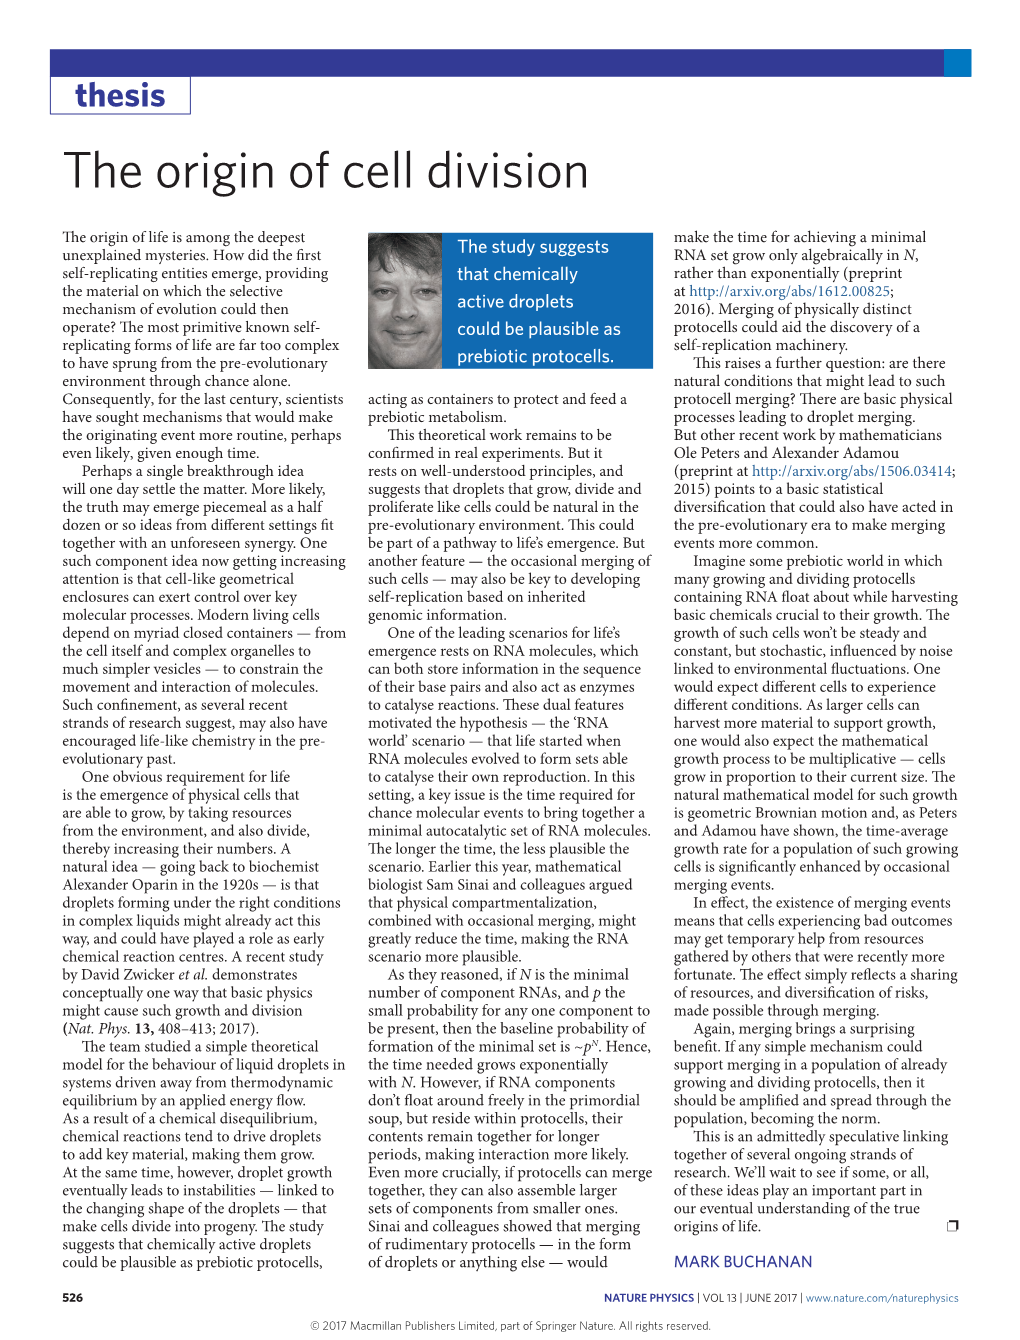 The Origin of Cell Division